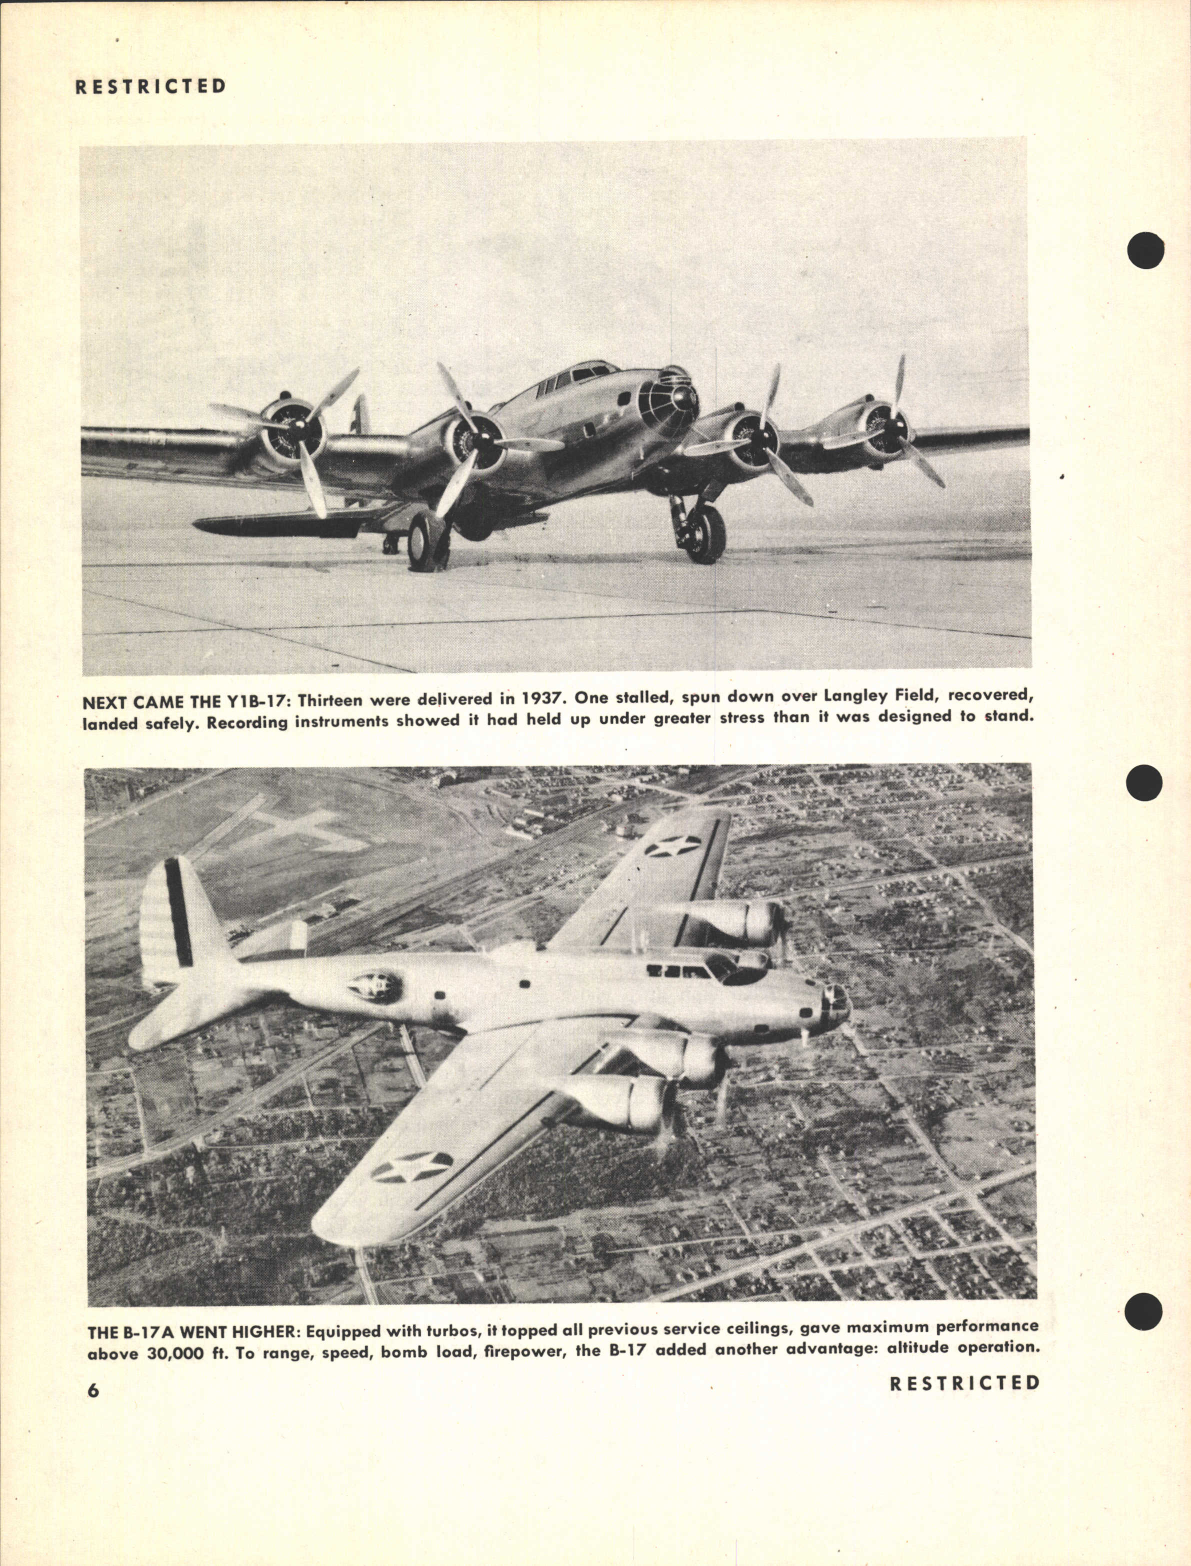 Sample page 8 from AirCorps Library document: Pilot Training Manual for B-17 Flying Fortress